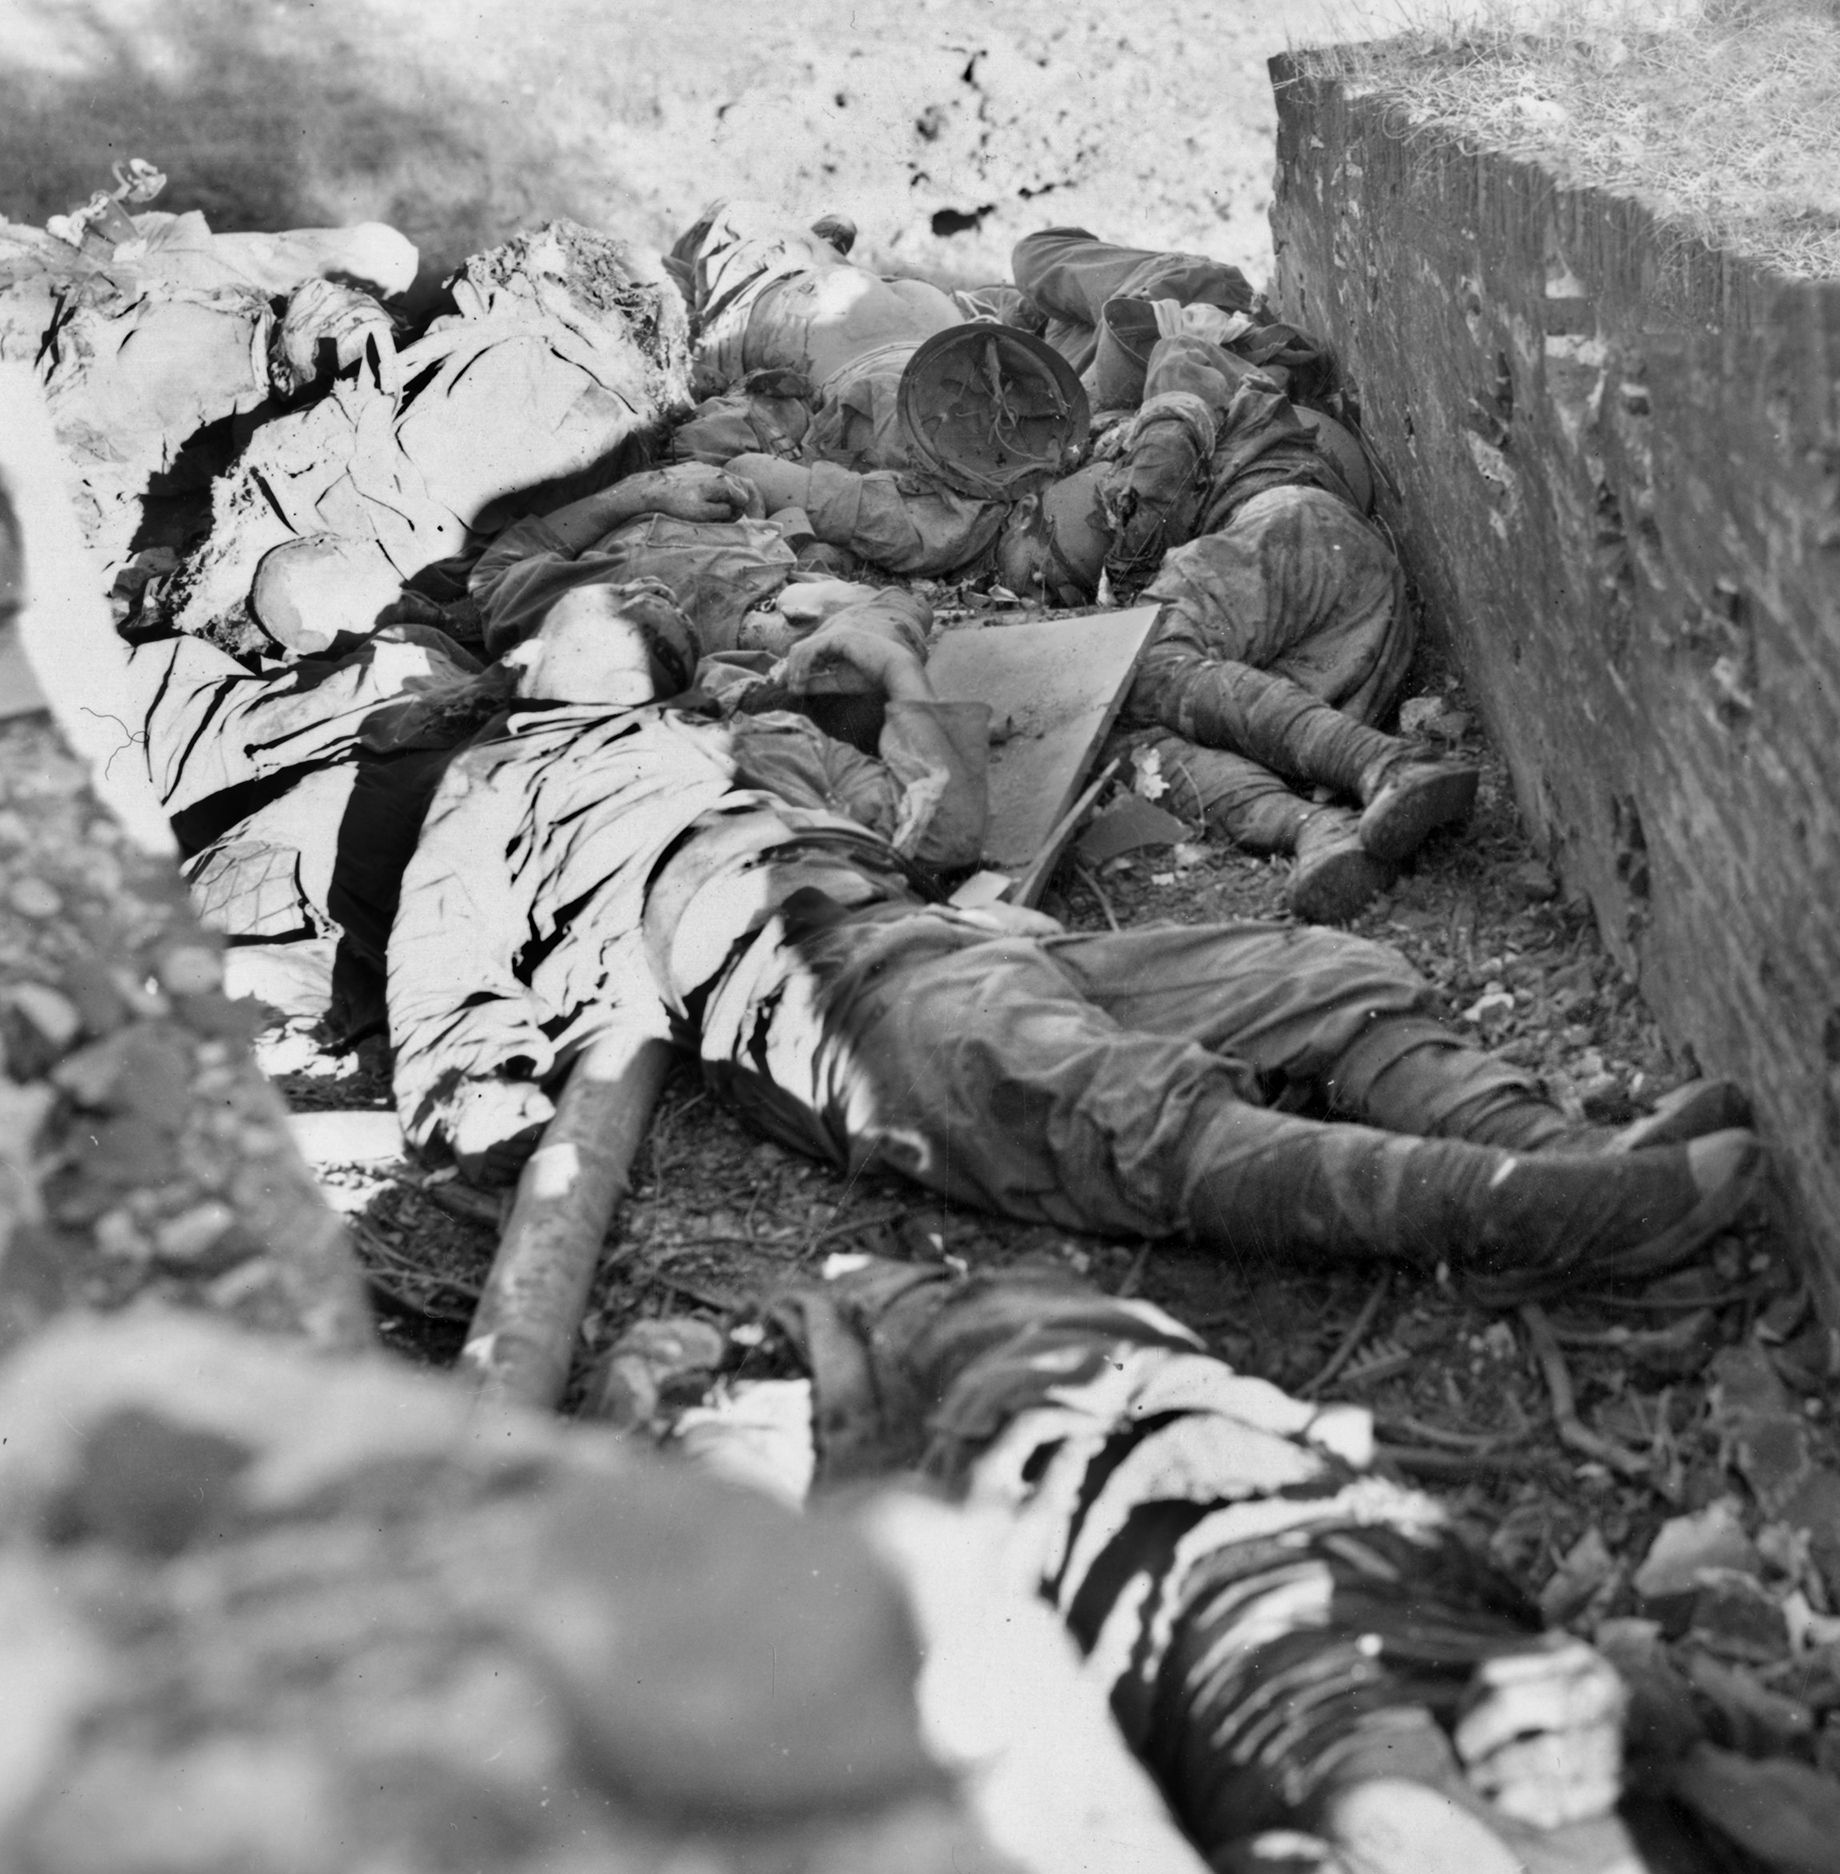 The bodies of Japanese soldiers killed in the heavy fighting in Manila lie unburied in a heap on February 22, 1945. The Japanese are known to have committed numerous atrocities against Filipino civilians during the battle for the city.